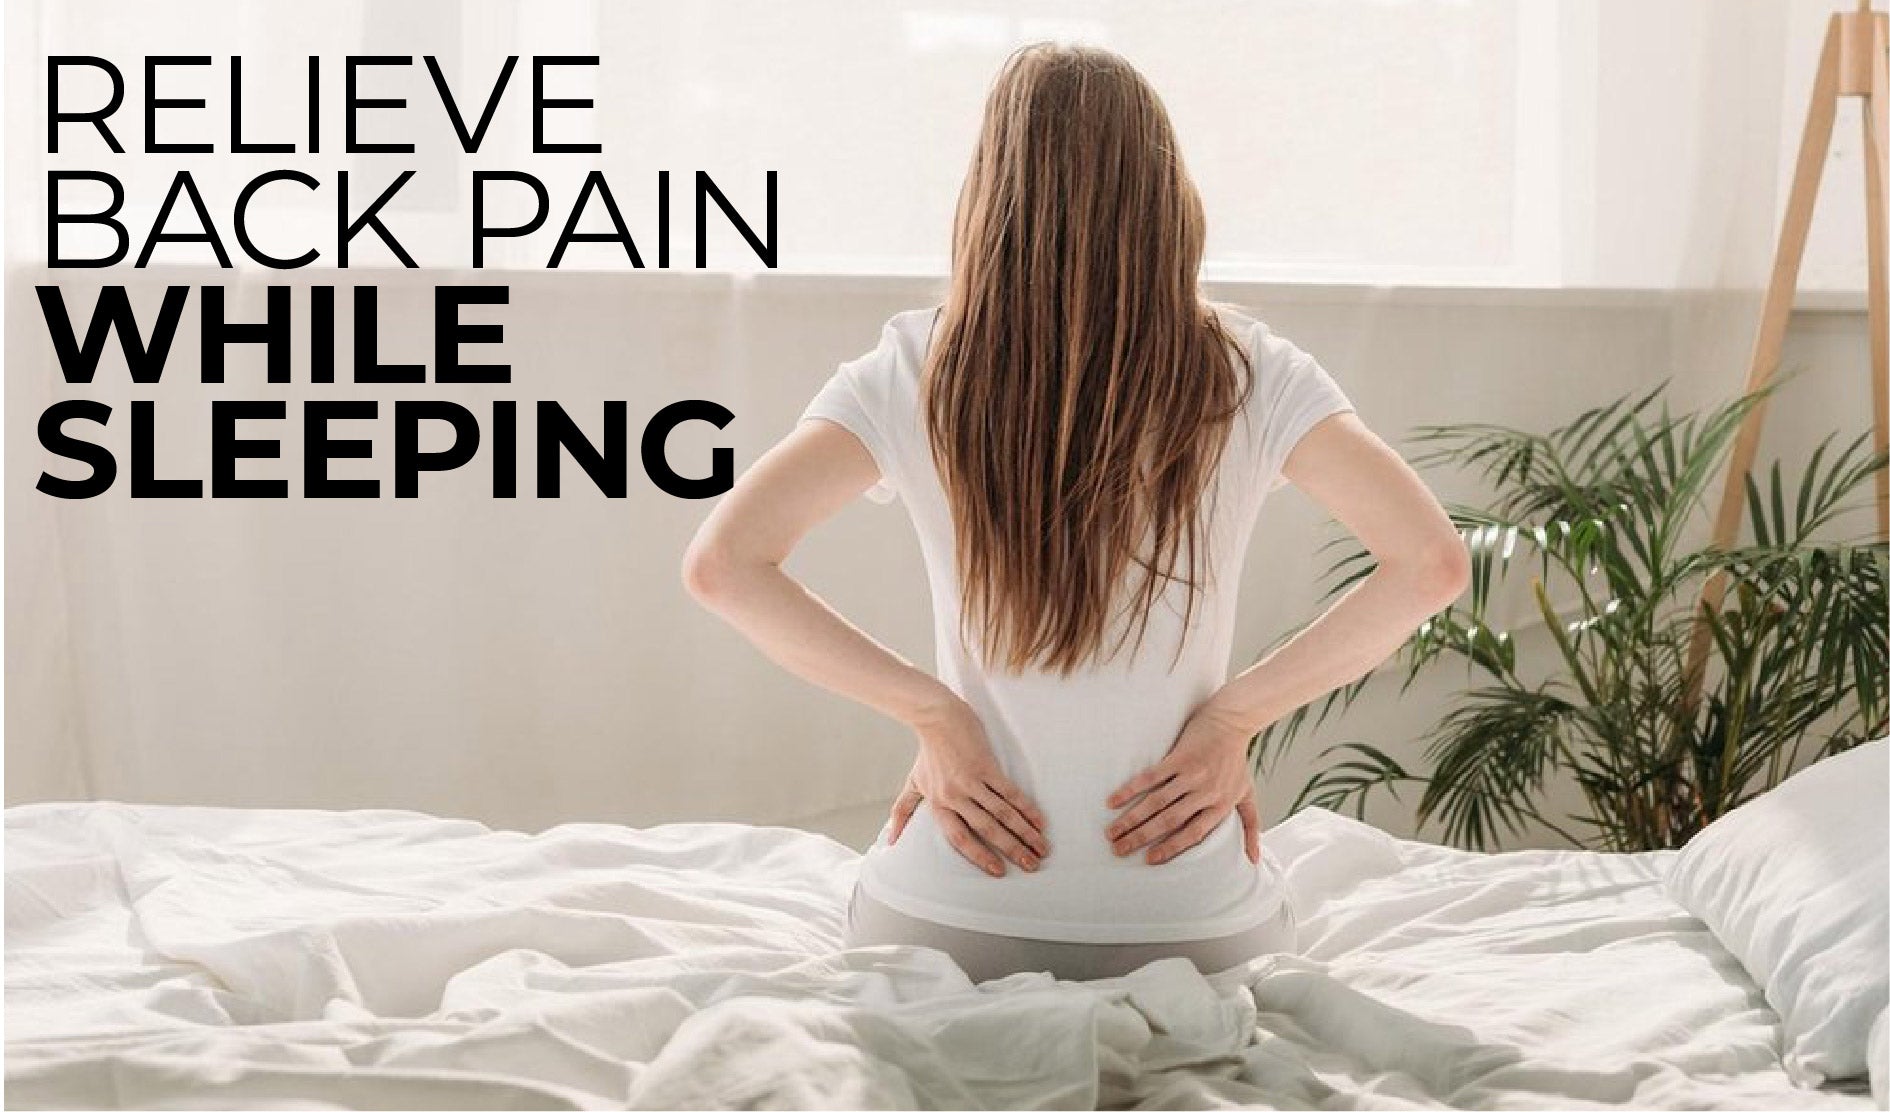 How To Fix Lower Back Pain From Sleeping on a Budget! Lumbar